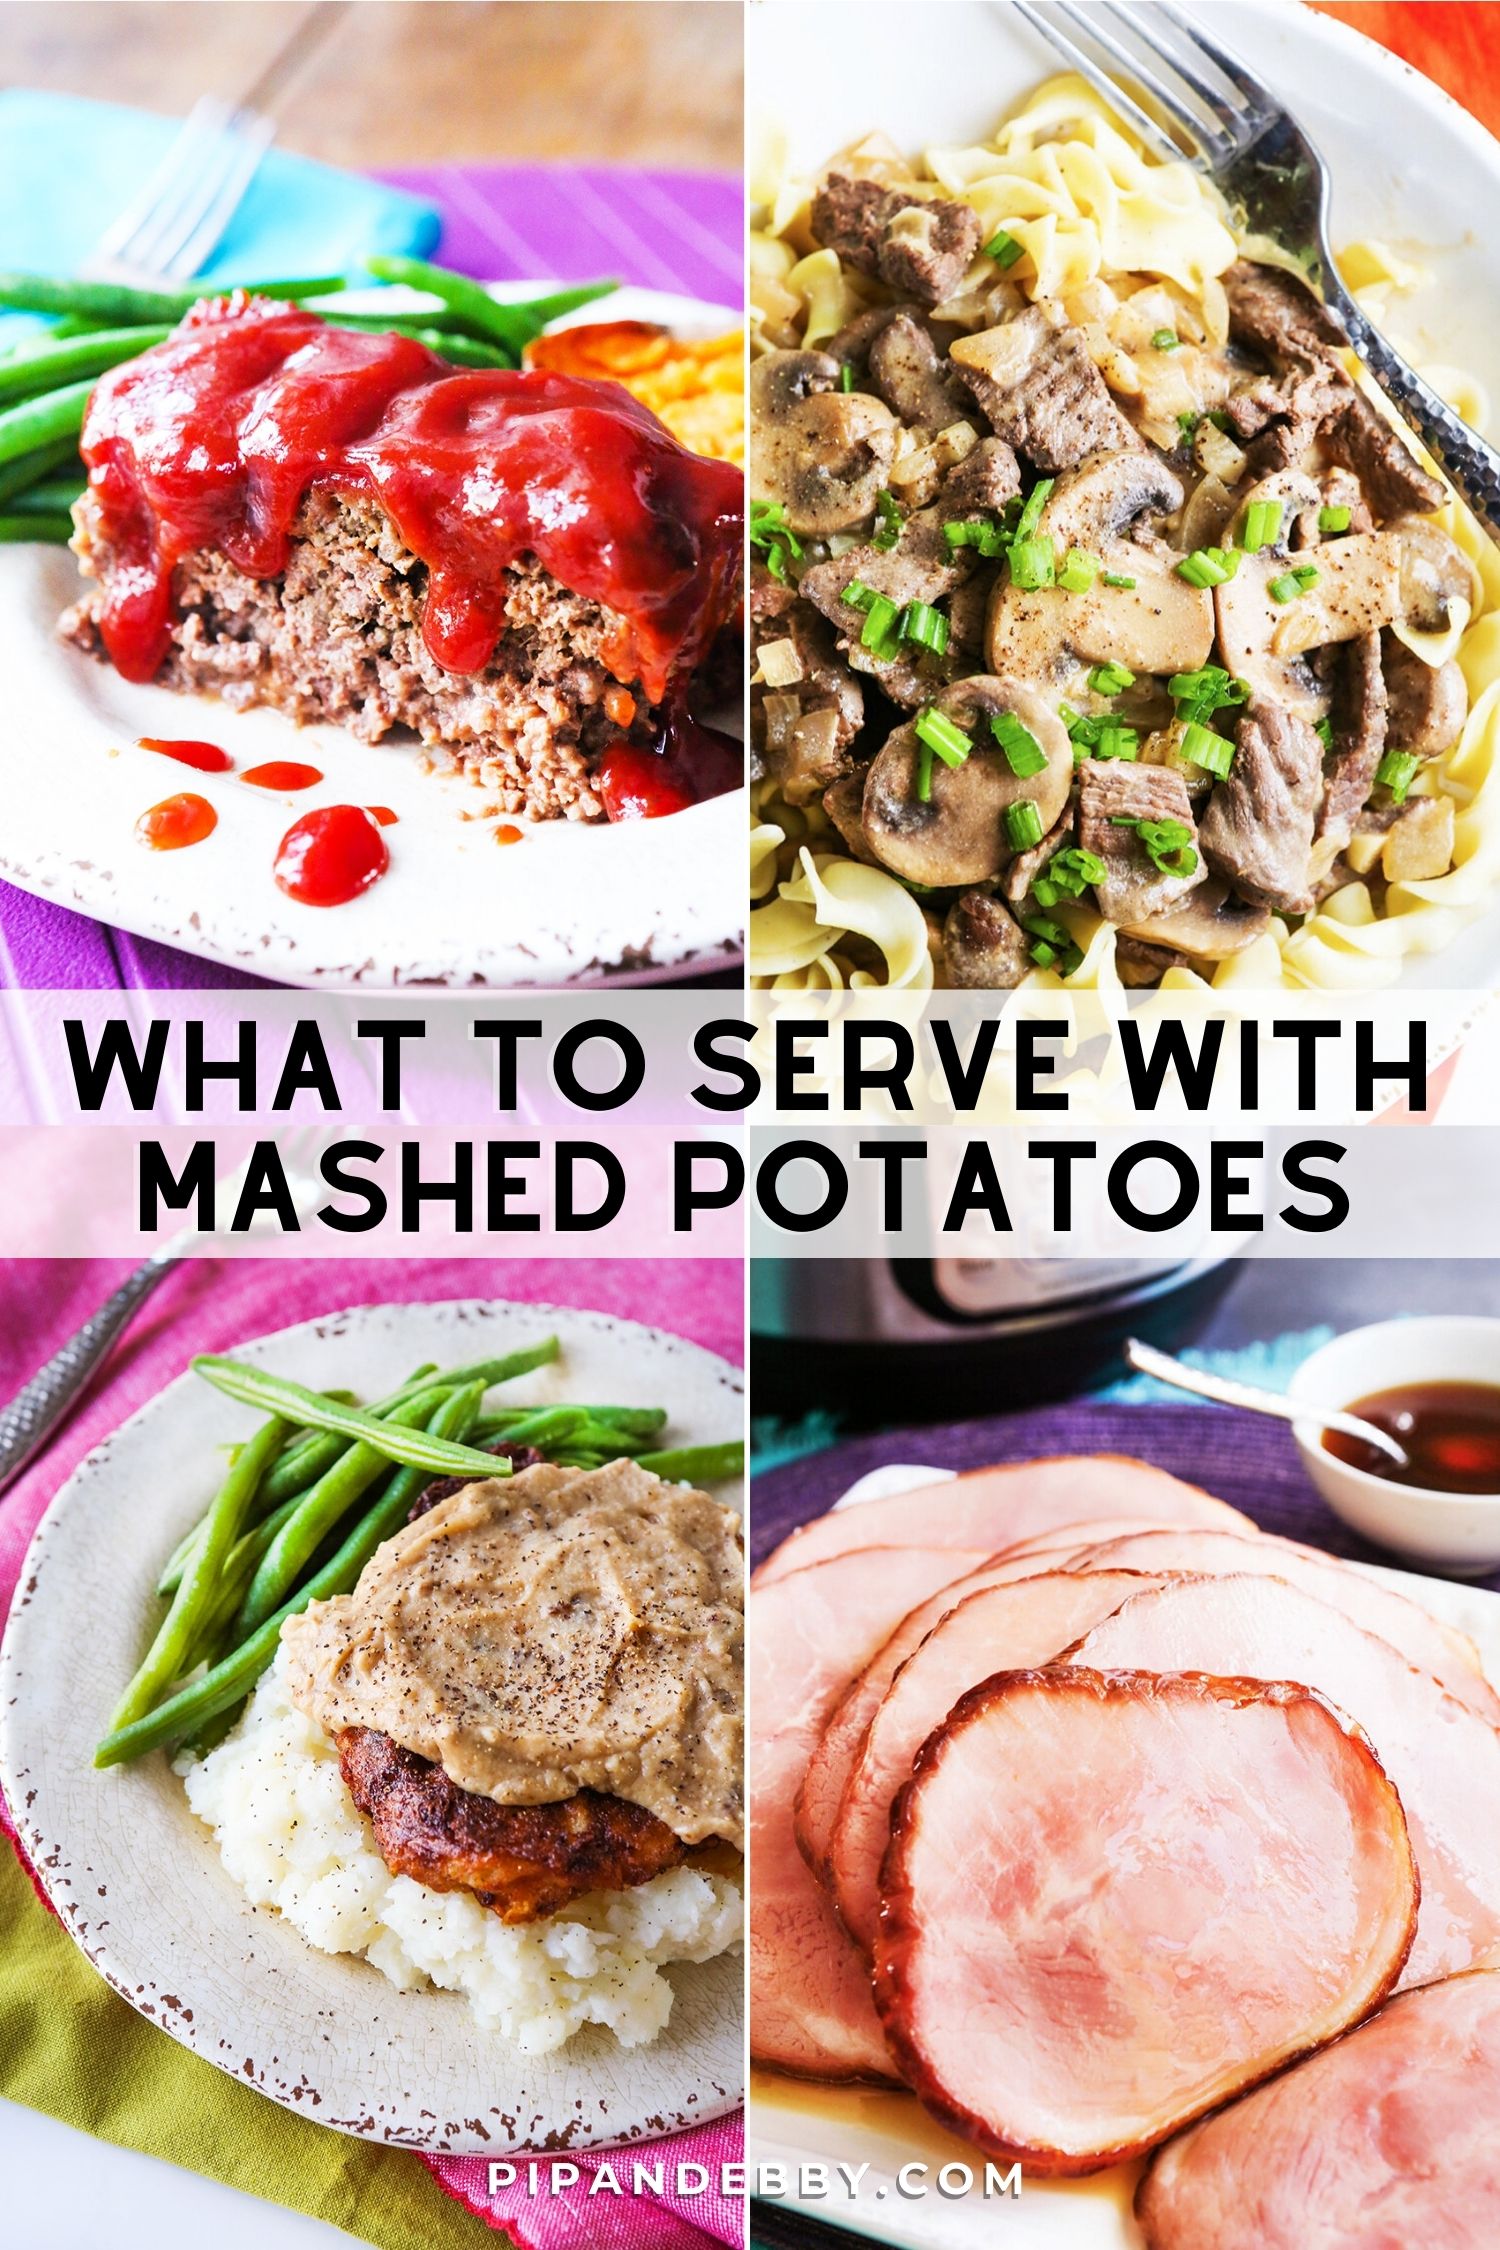 Four food photos in a grid with text overlay reading, "What to serve with mashed potatoes."